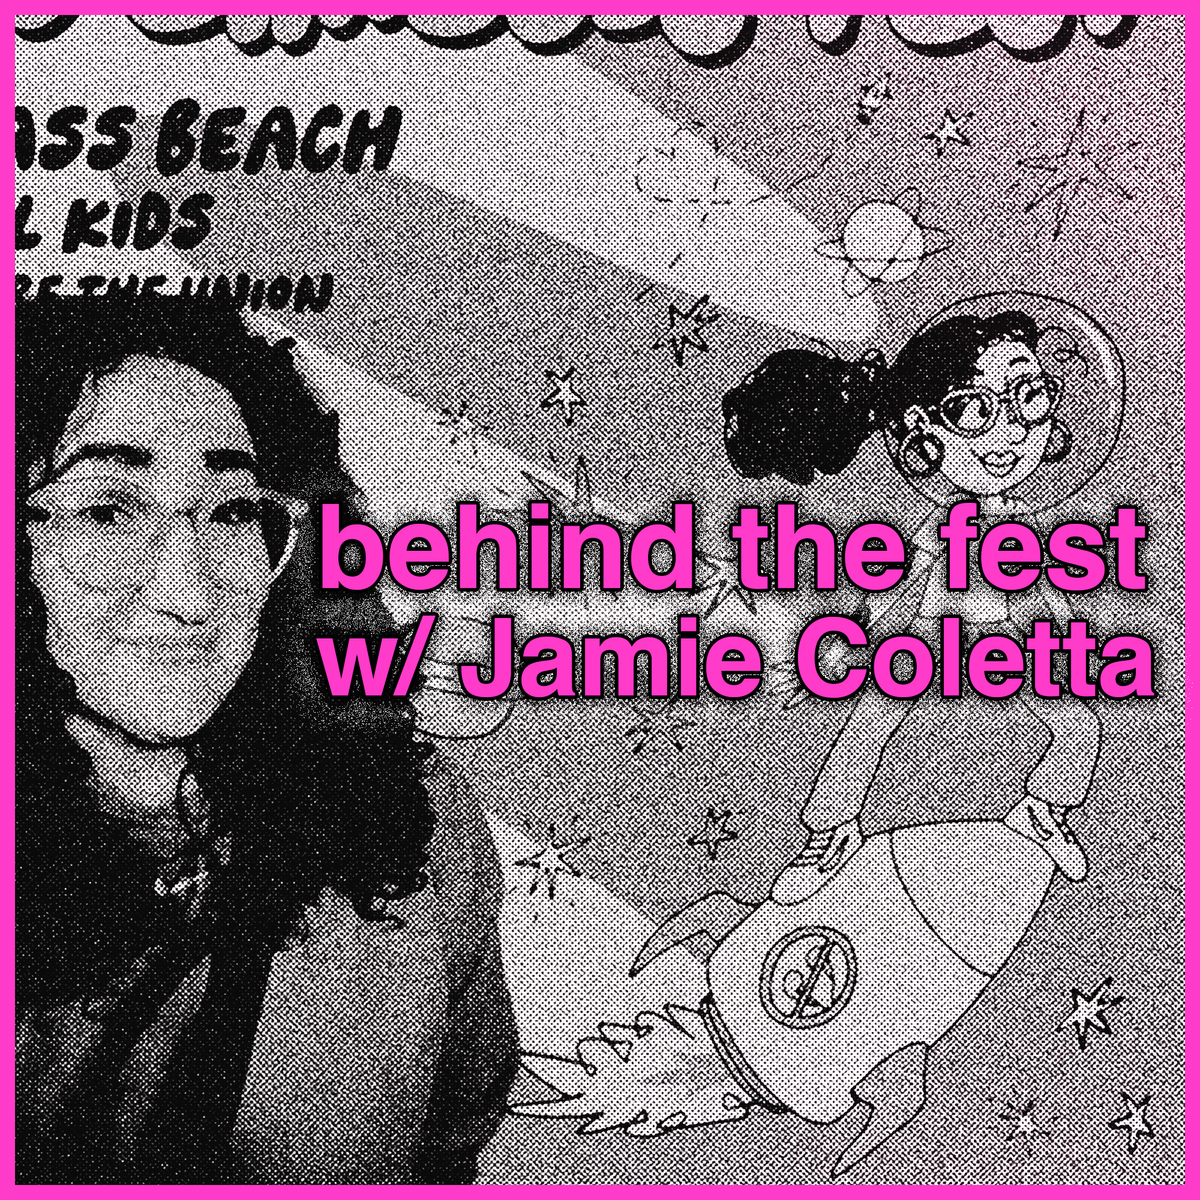 "I went with the bands that made me feel something" - behind the music fest with No Earbuds' Jamie Coletta